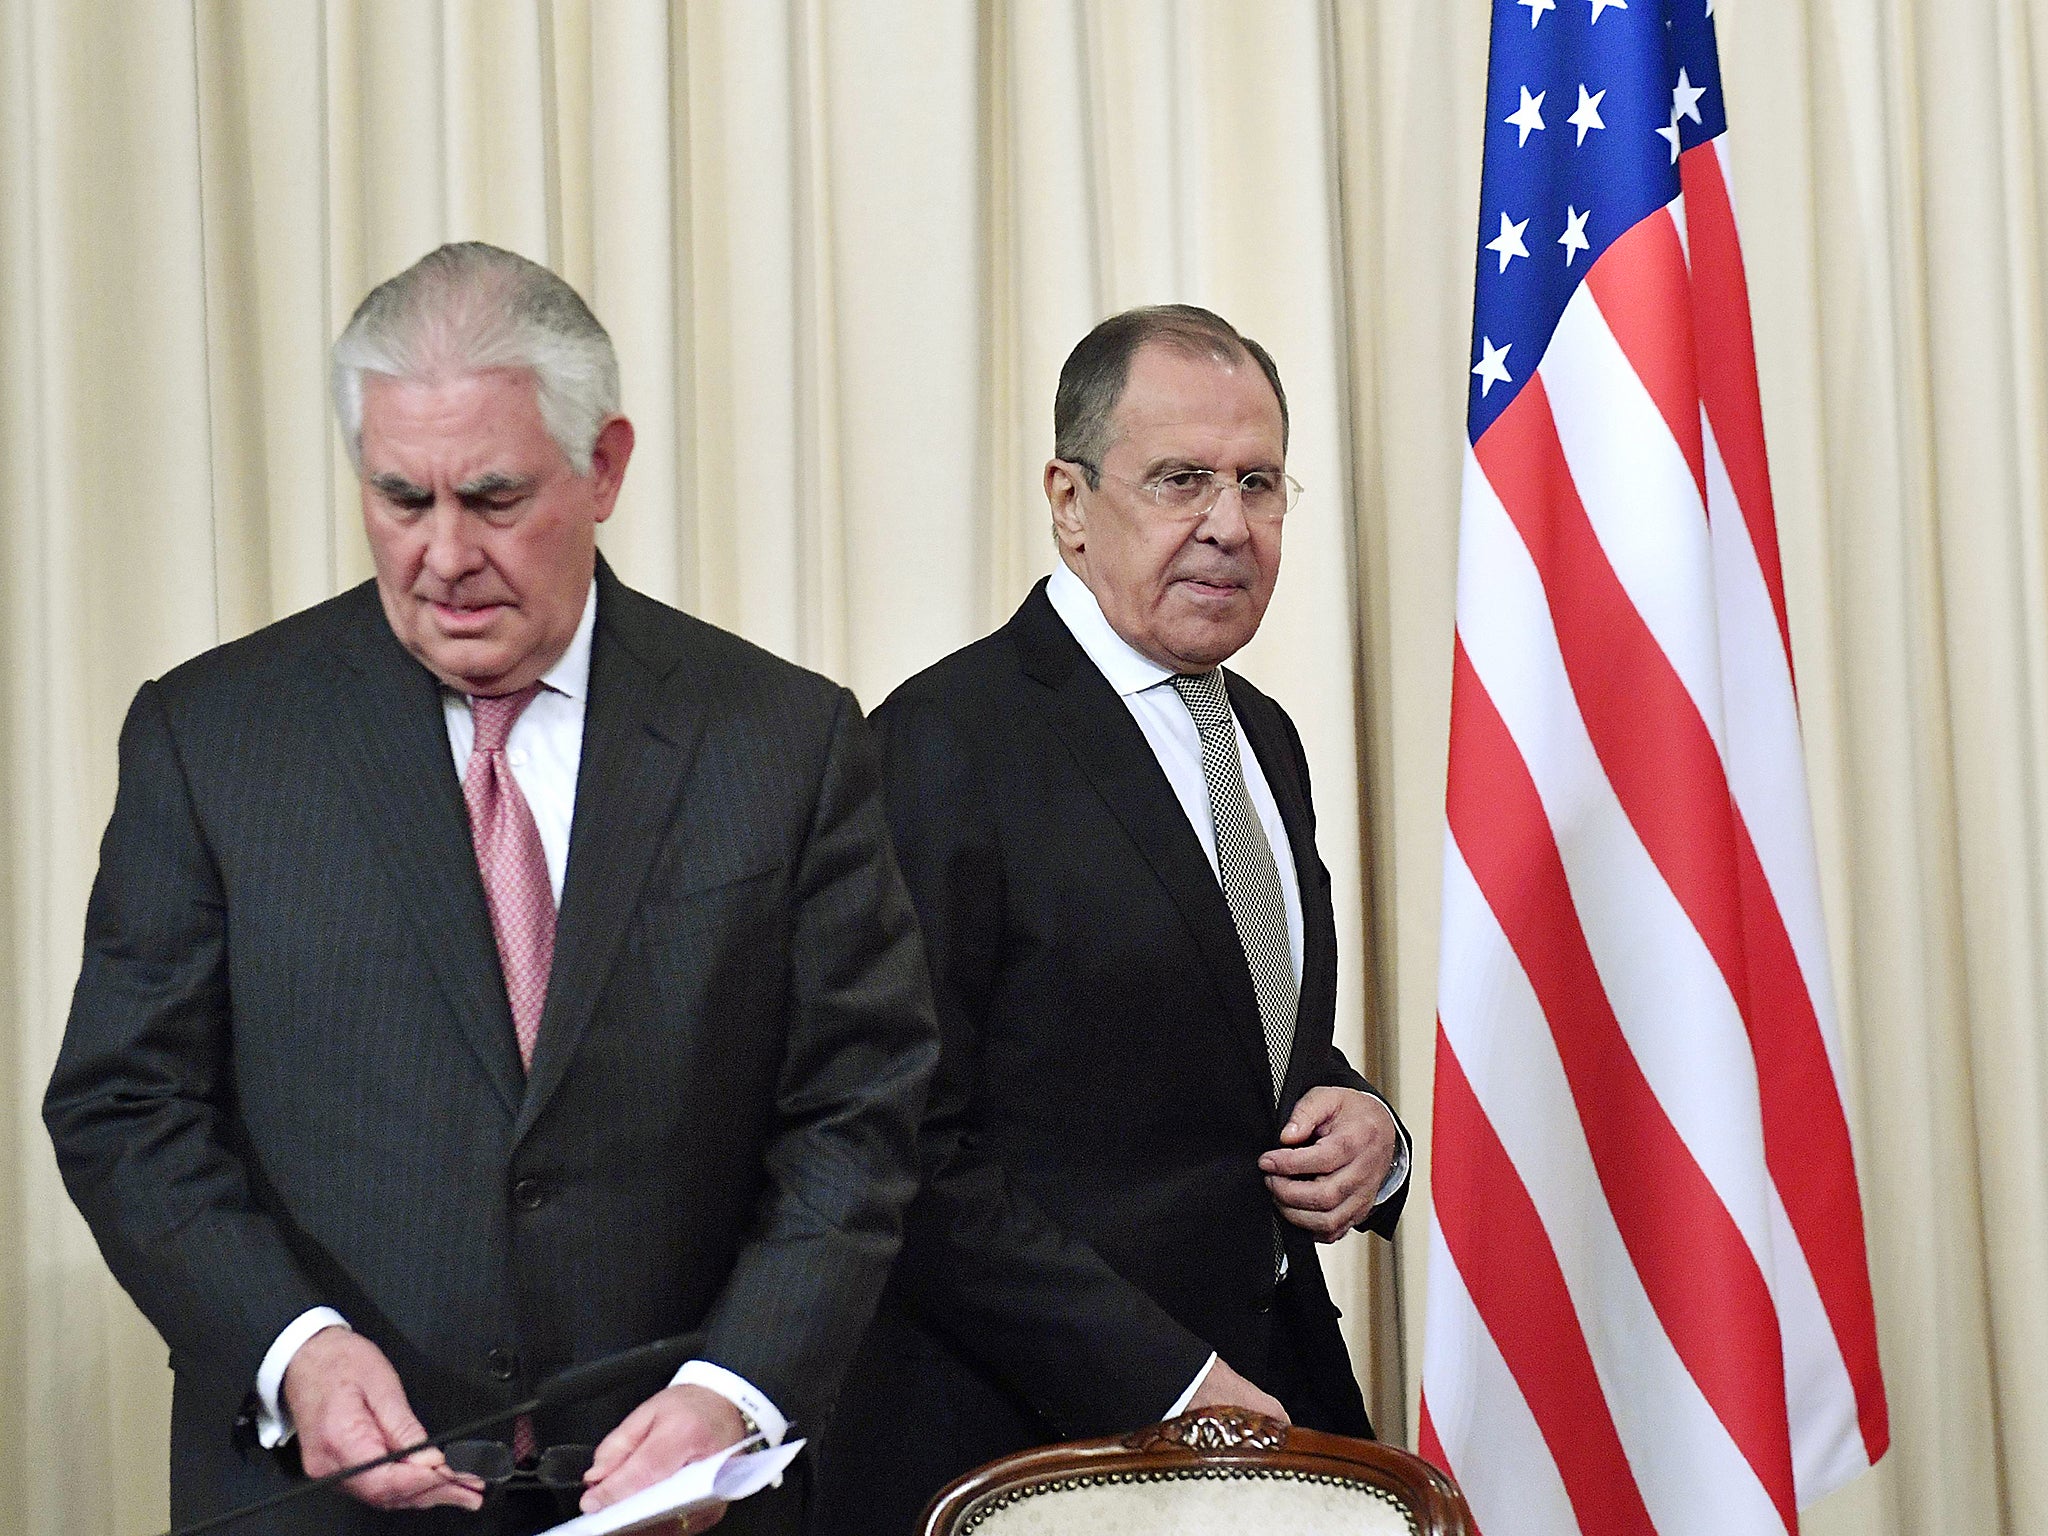 Mr Lavrov held a tense press conference with Rex Tillerson earlier this week